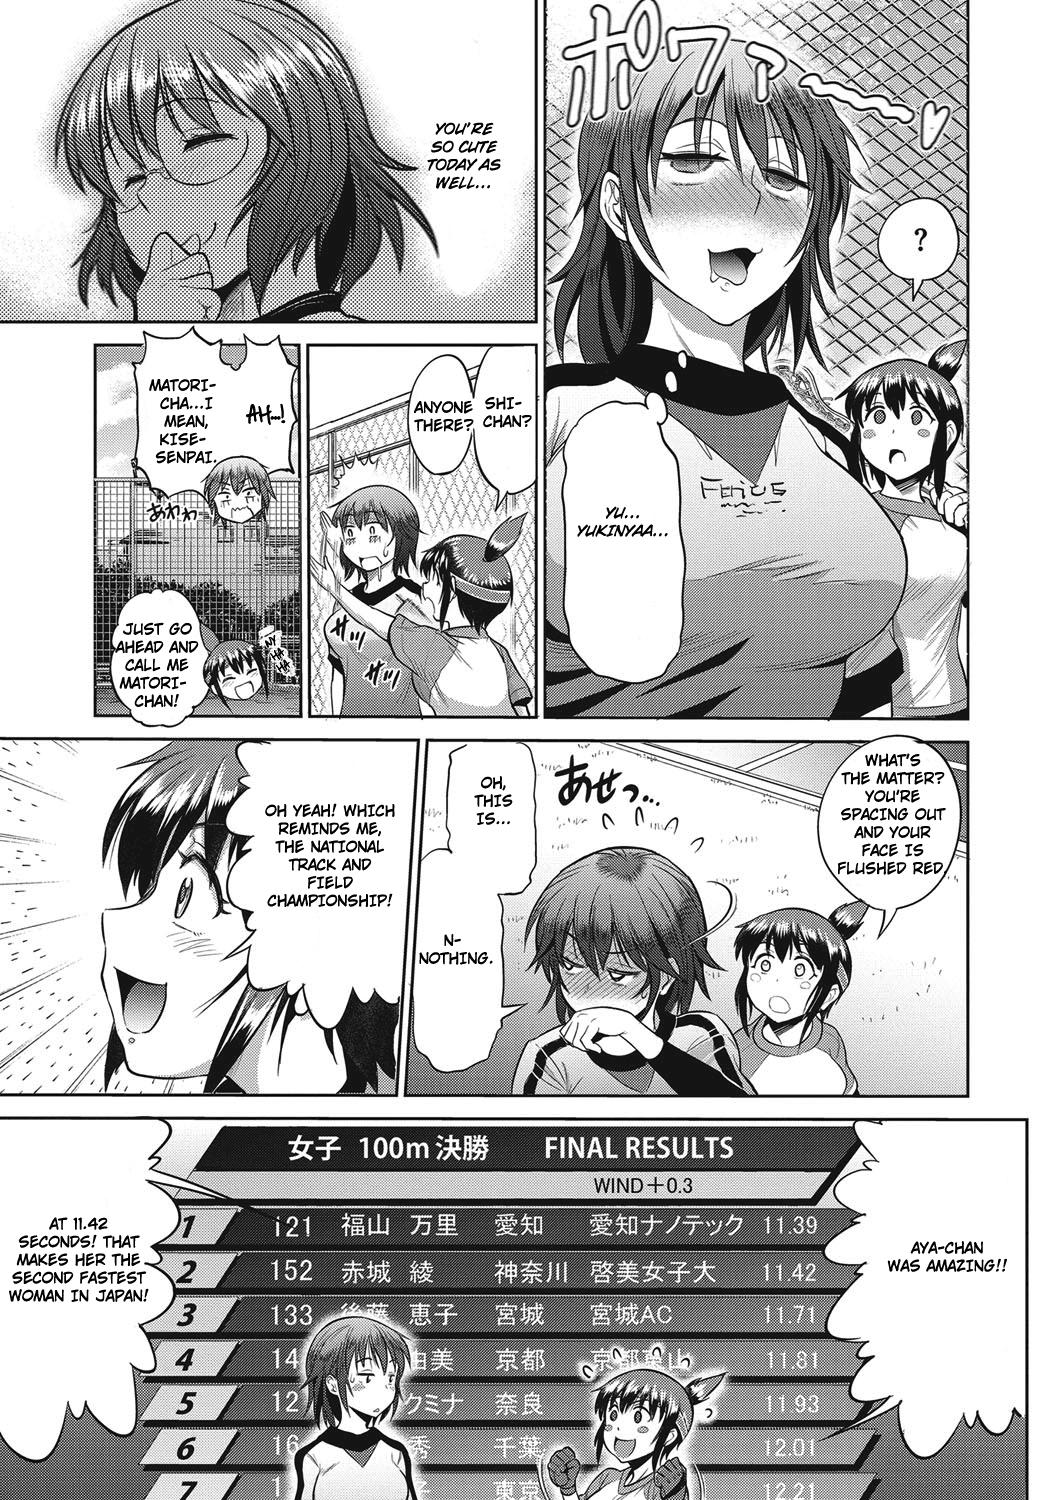 Sex Tape [DISTANCE] Joshi Lacu! - Girls Lacrosse Club ~2 Years Later~ Ch. 3 (COMIC ExE 04) [English] [TripleSevenScans] [Digital] Oiled - Page 11